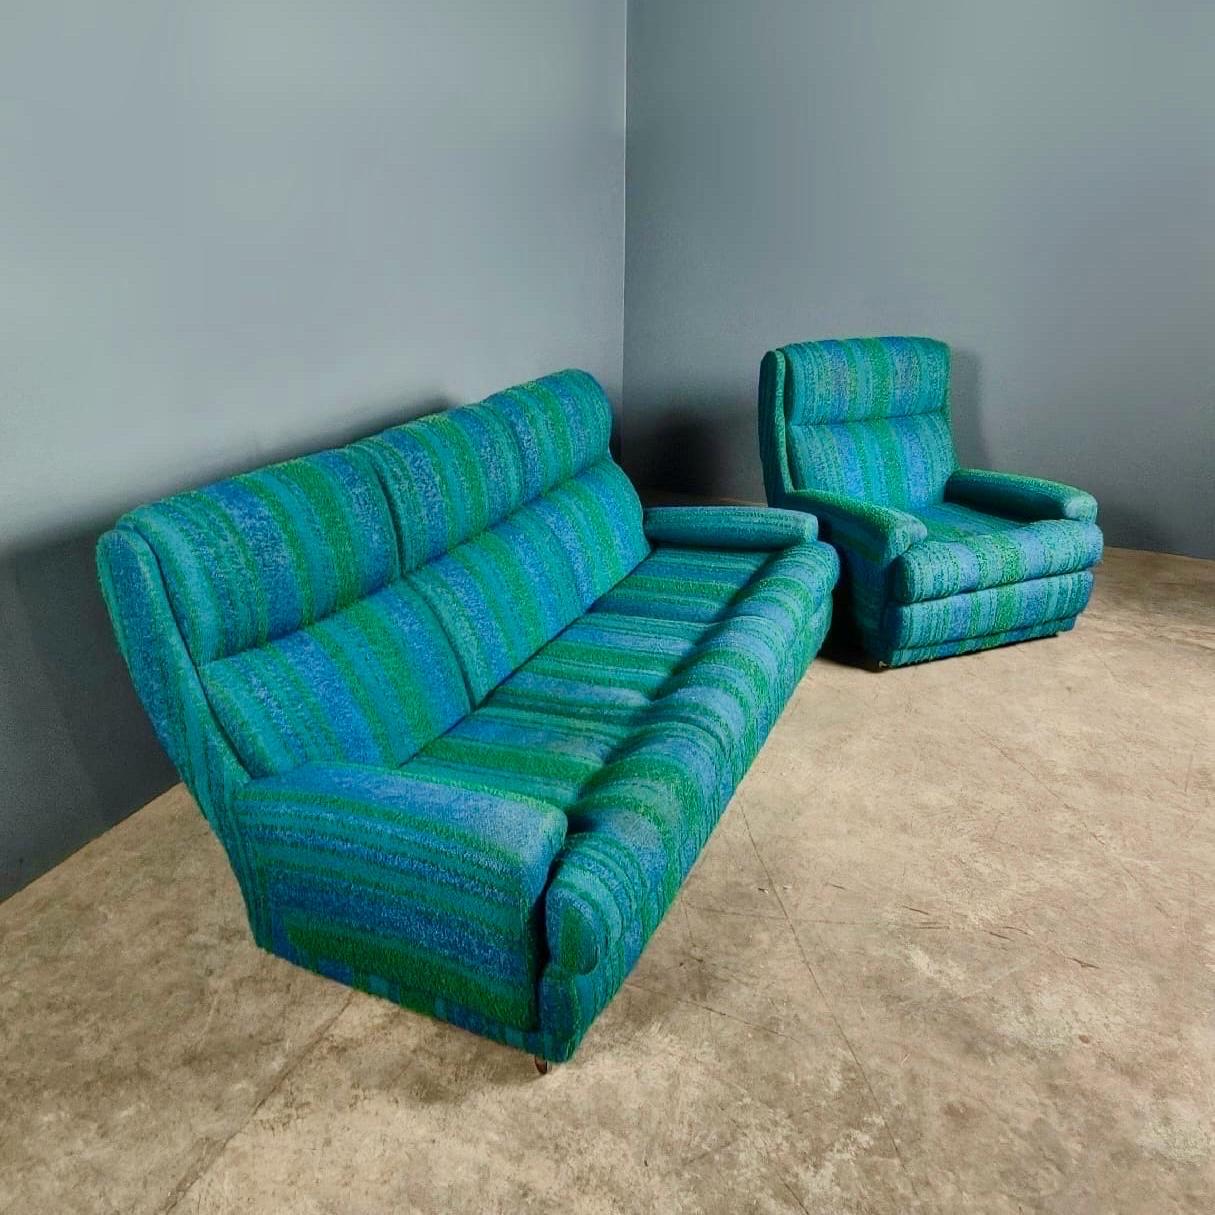 New Stock ✅

Mid Century Three Seater Sofa and Matching Armchair Blue and Green Vintage Retro MCM

Three seater sofa and matching armchair in a beautiful blue and green original wool fabric. The upholstery has been professionally cleaned and has no